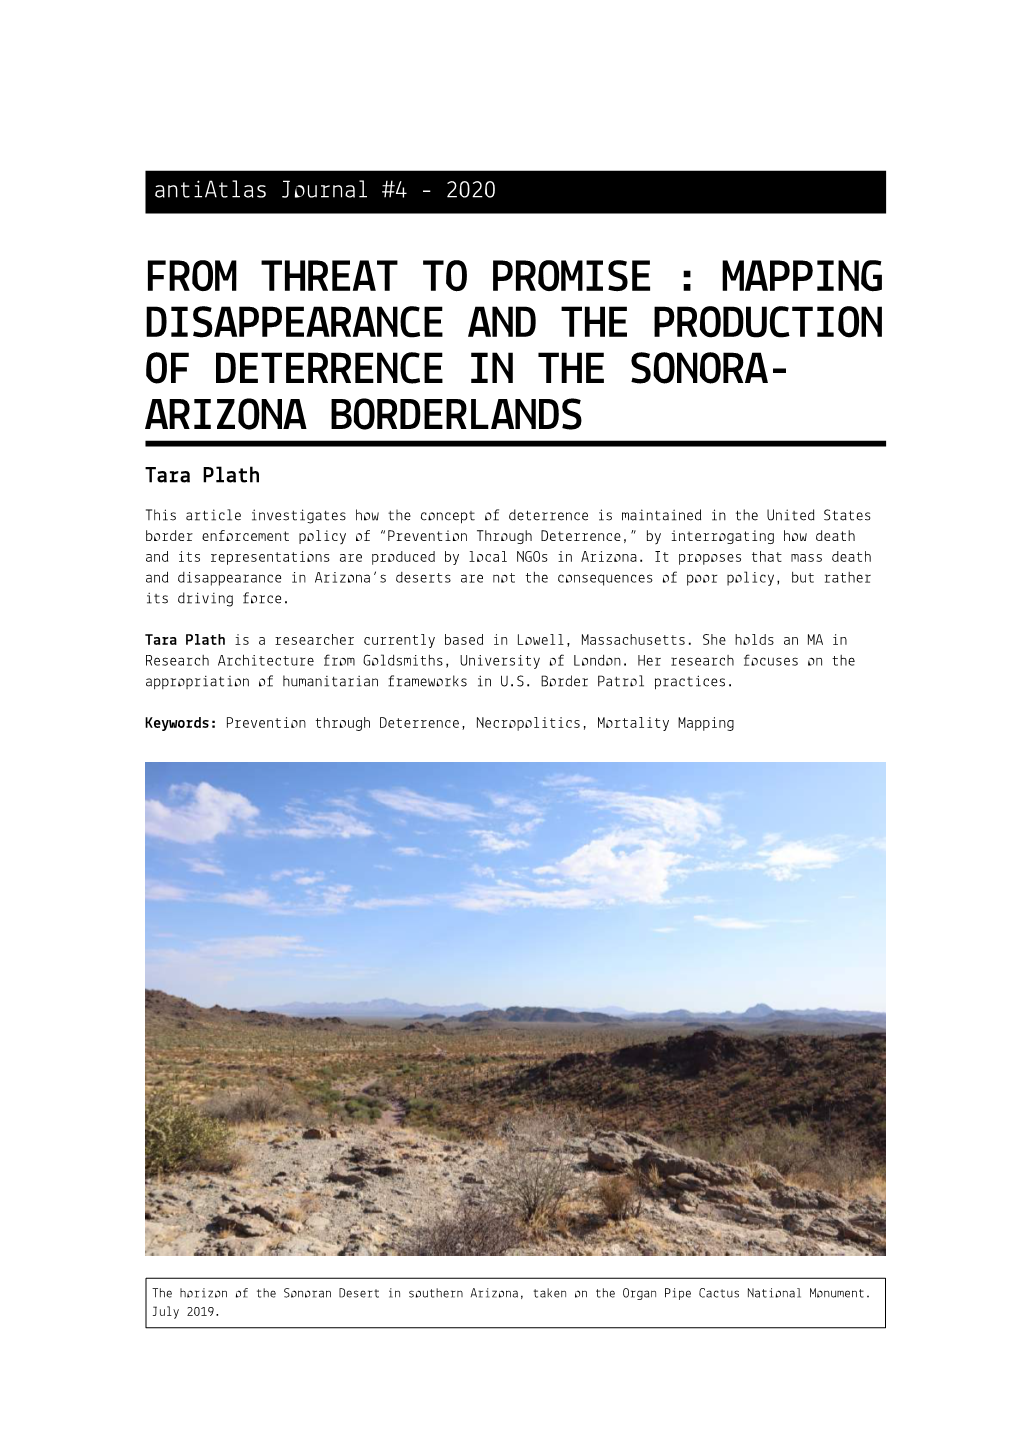 FROM THREAT to PROMISE : MAPPING DISAPPEARANCE and the PRODUCTION of DETERRENCE in the SONORA- ARIZONA BORDERLANDS Tara Plath